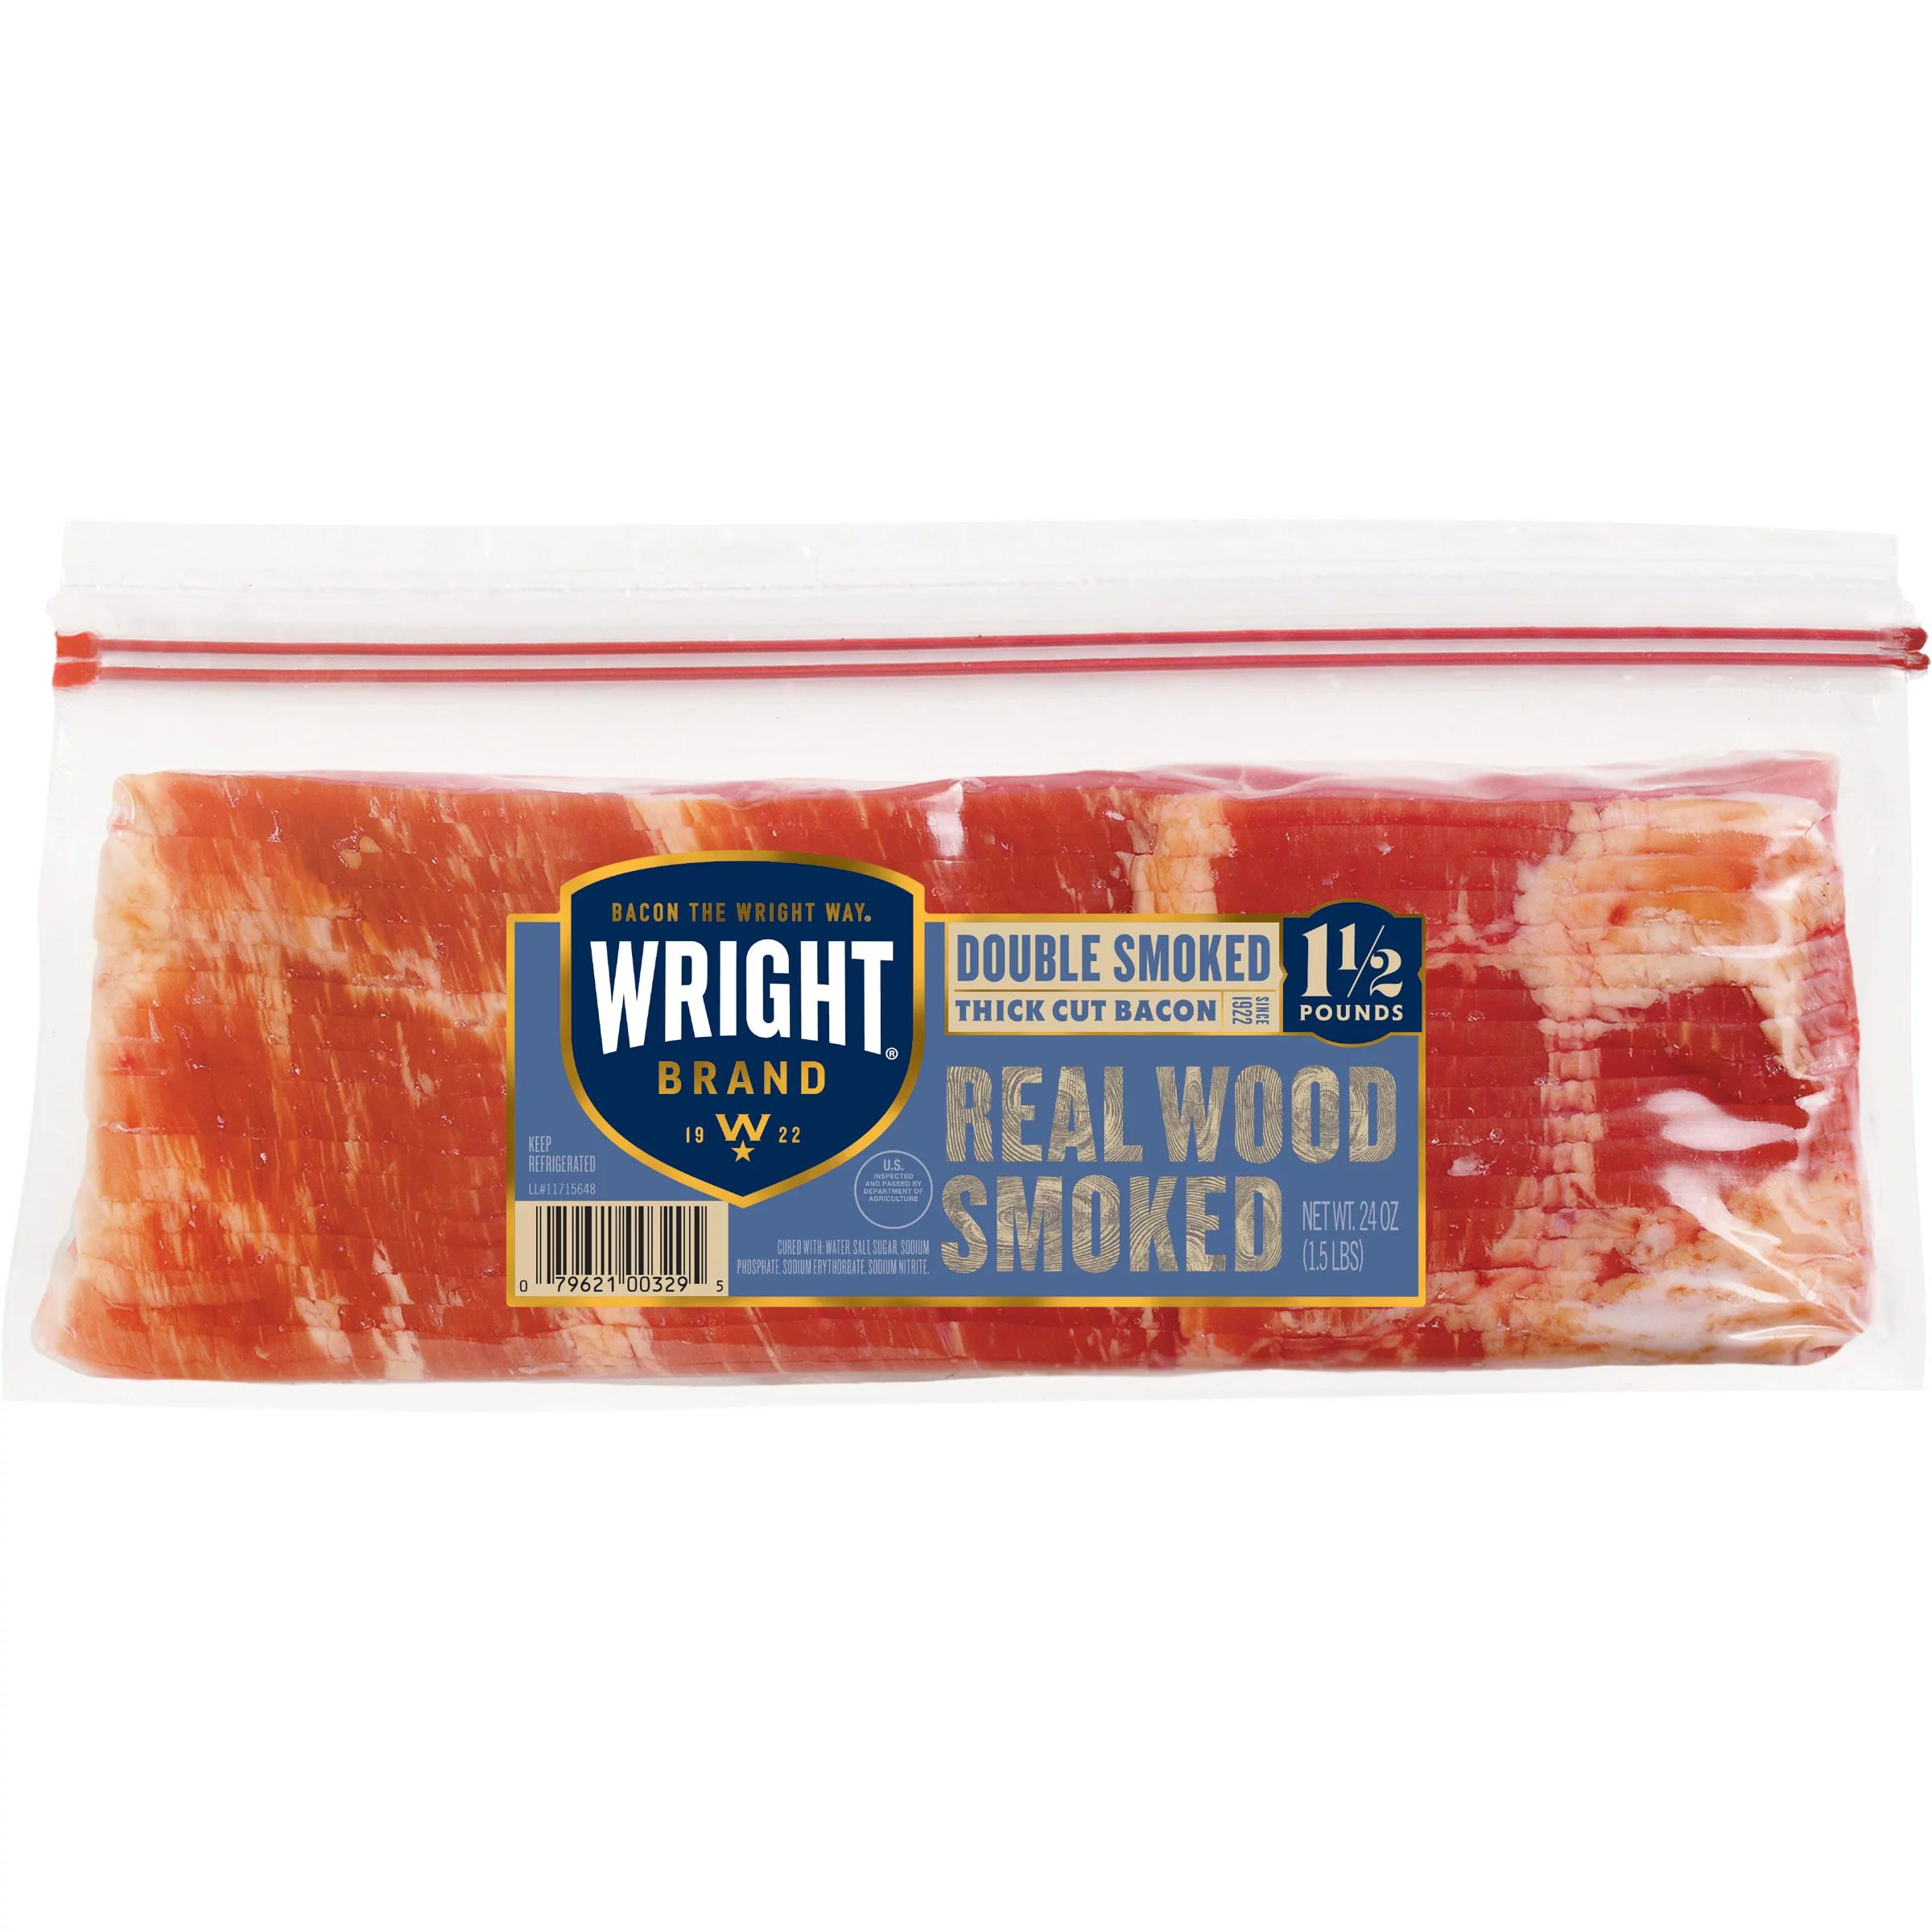 double smoked bacon - How many calories is a double smoked bacon